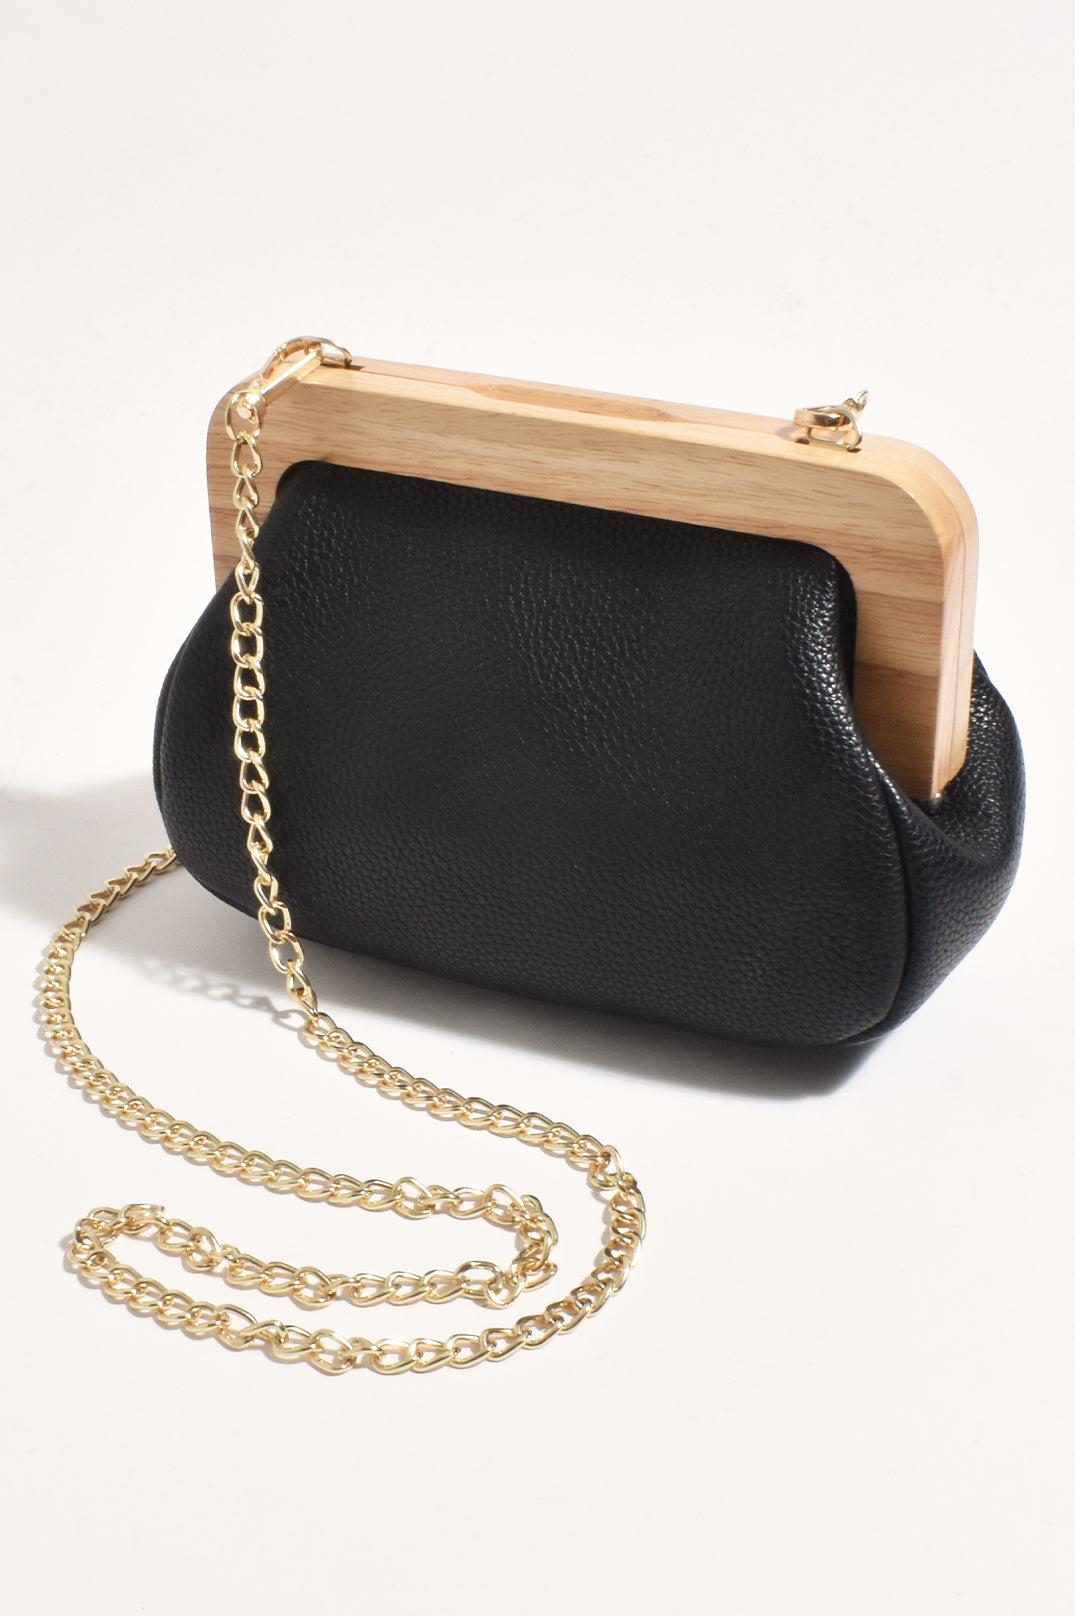 Kimmi Timber Frame Clutch - Black-Bags & Clutches-Adorne-The Bay Room